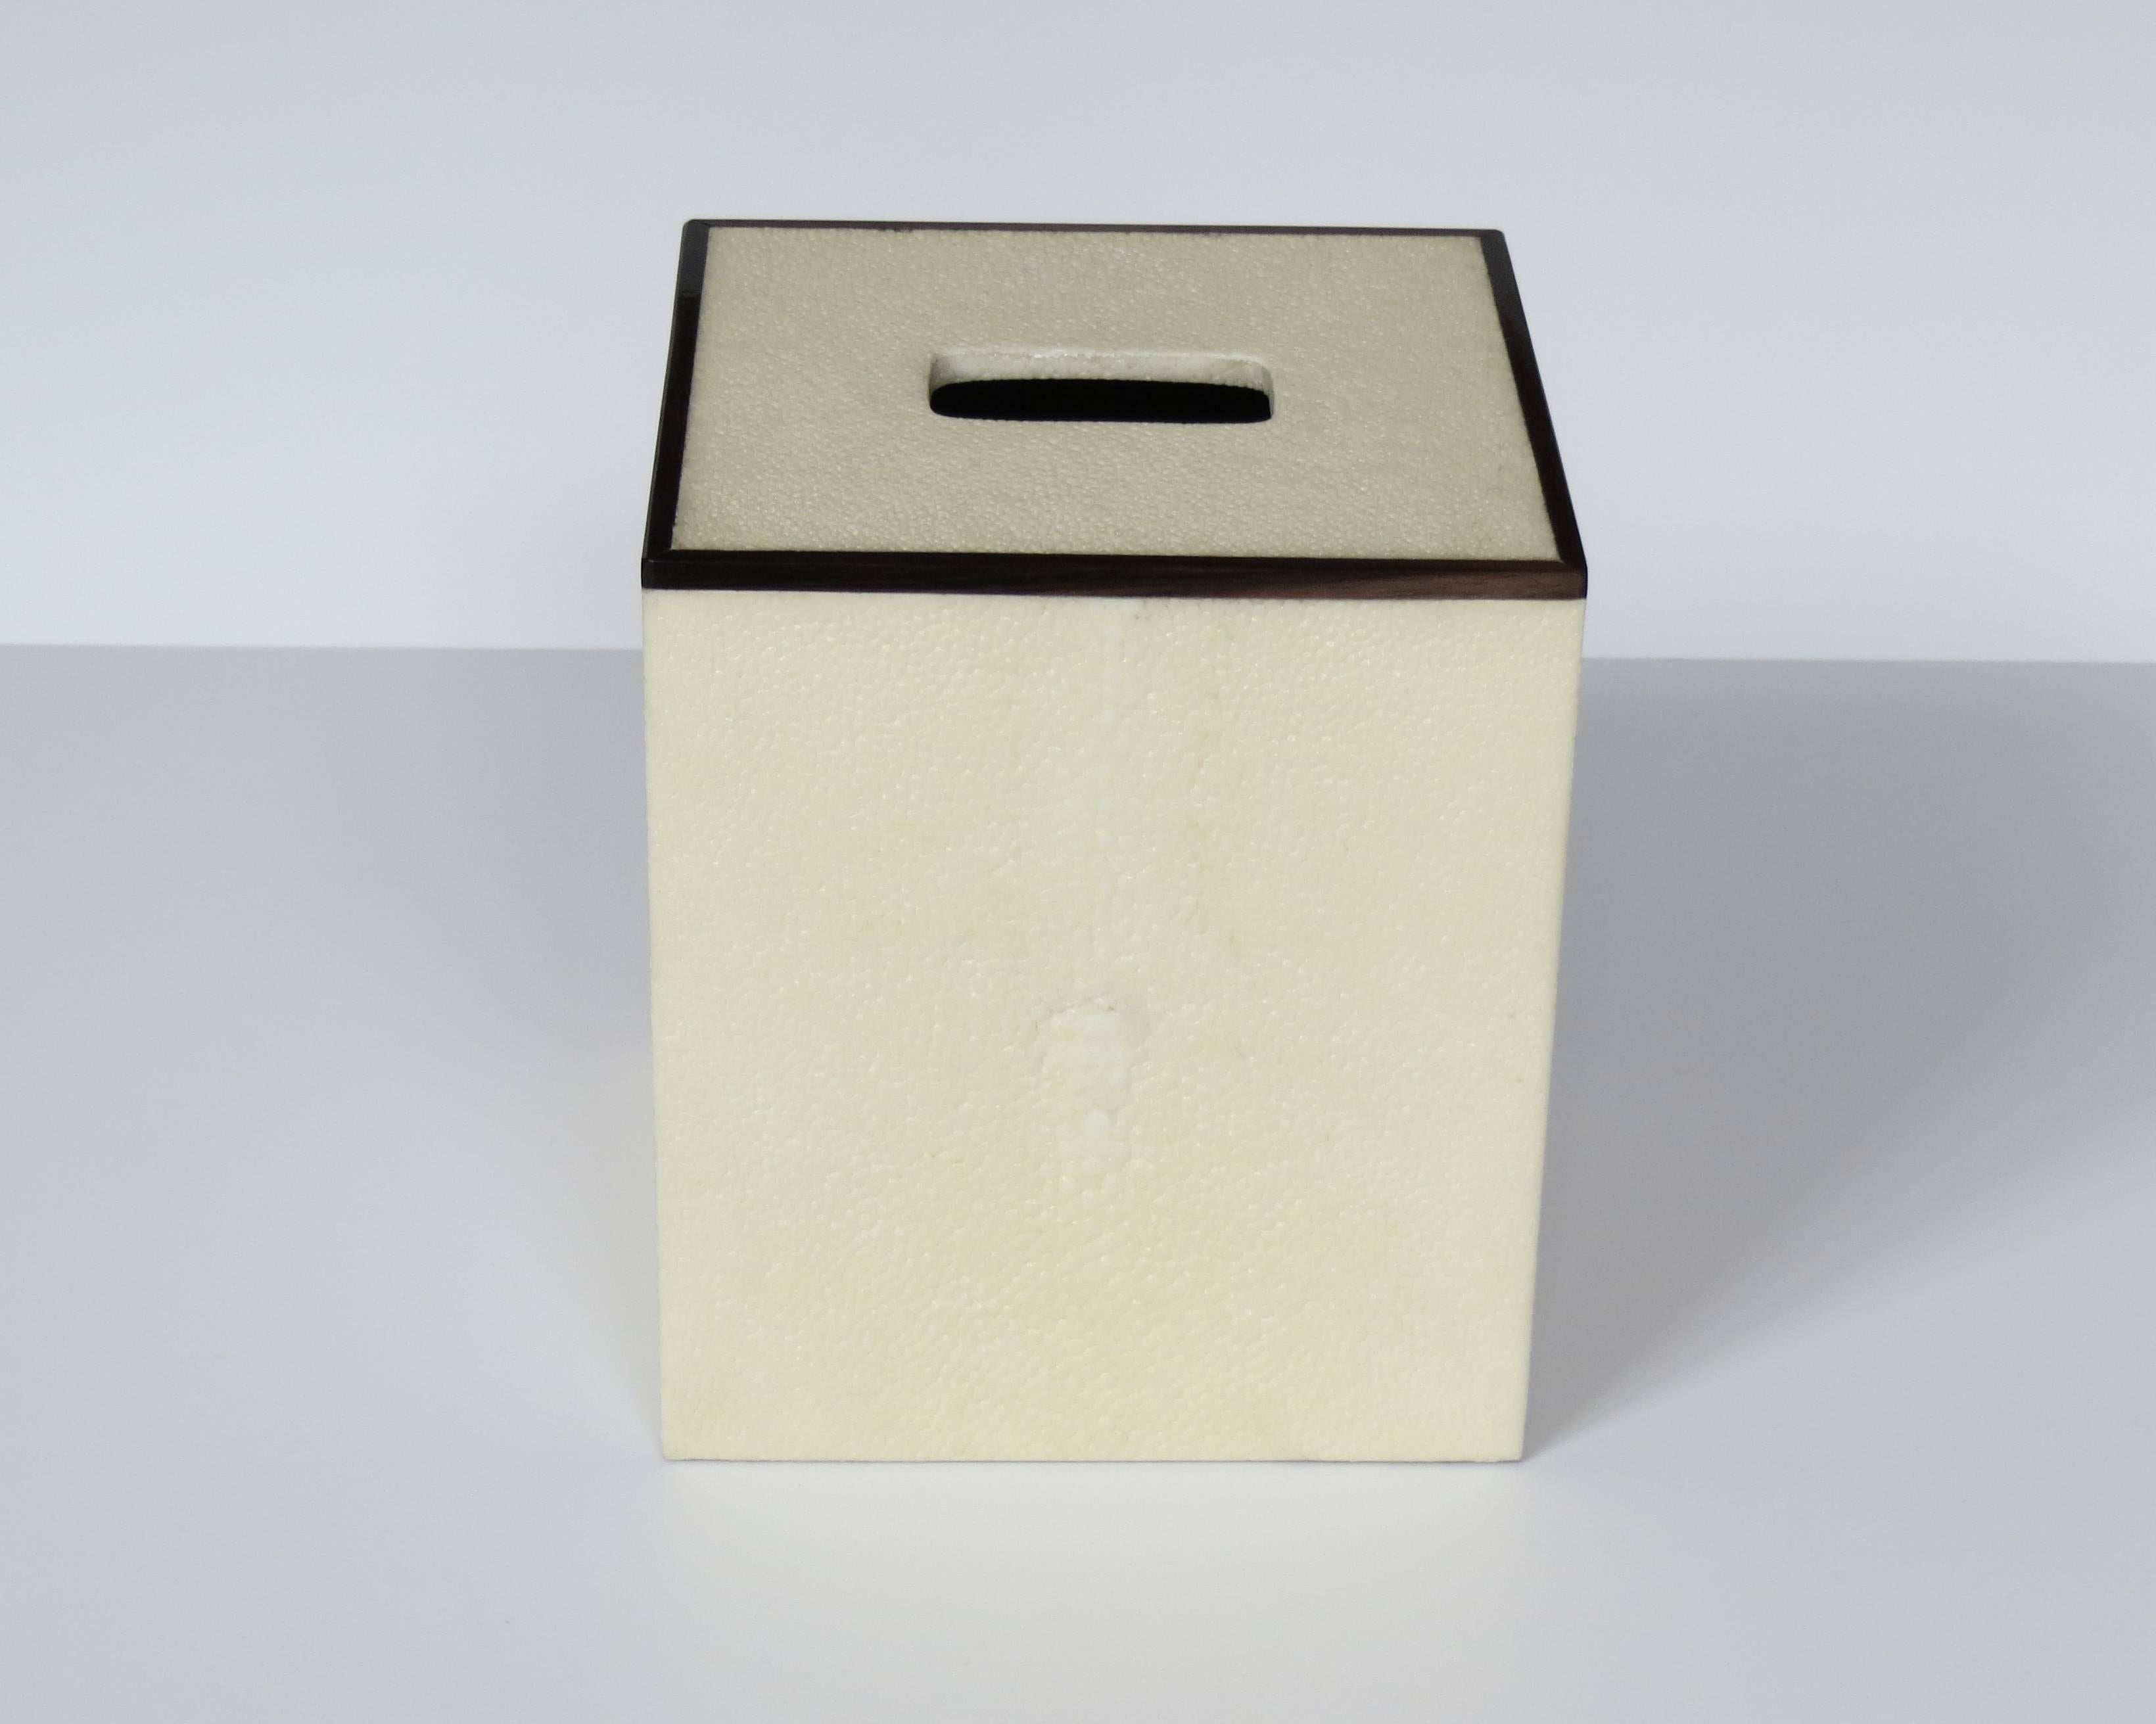 Beautiful shagreen tissue box with wood inlay .
Size: 5.25''X 5.25'' X 6''.
Galart offers a wide selection of custom made boxes and accessories in many colors
Please contact us for more information